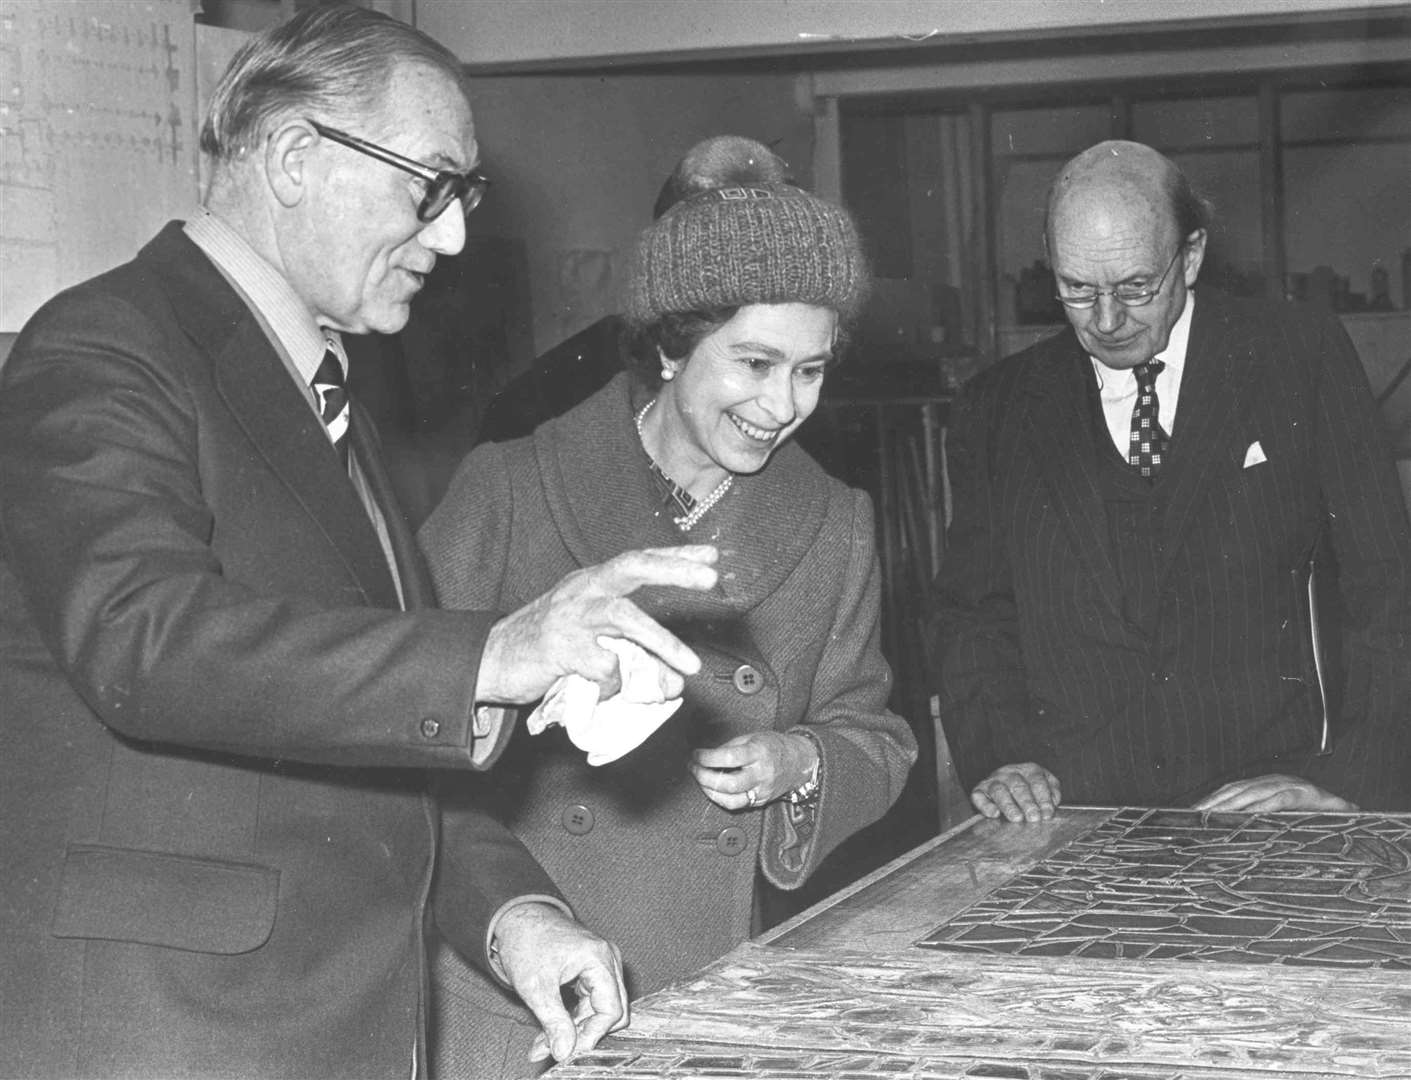 The Queen spent five hours at Canterbury Cathedral inspecting the restoration work being carried out in December 1976